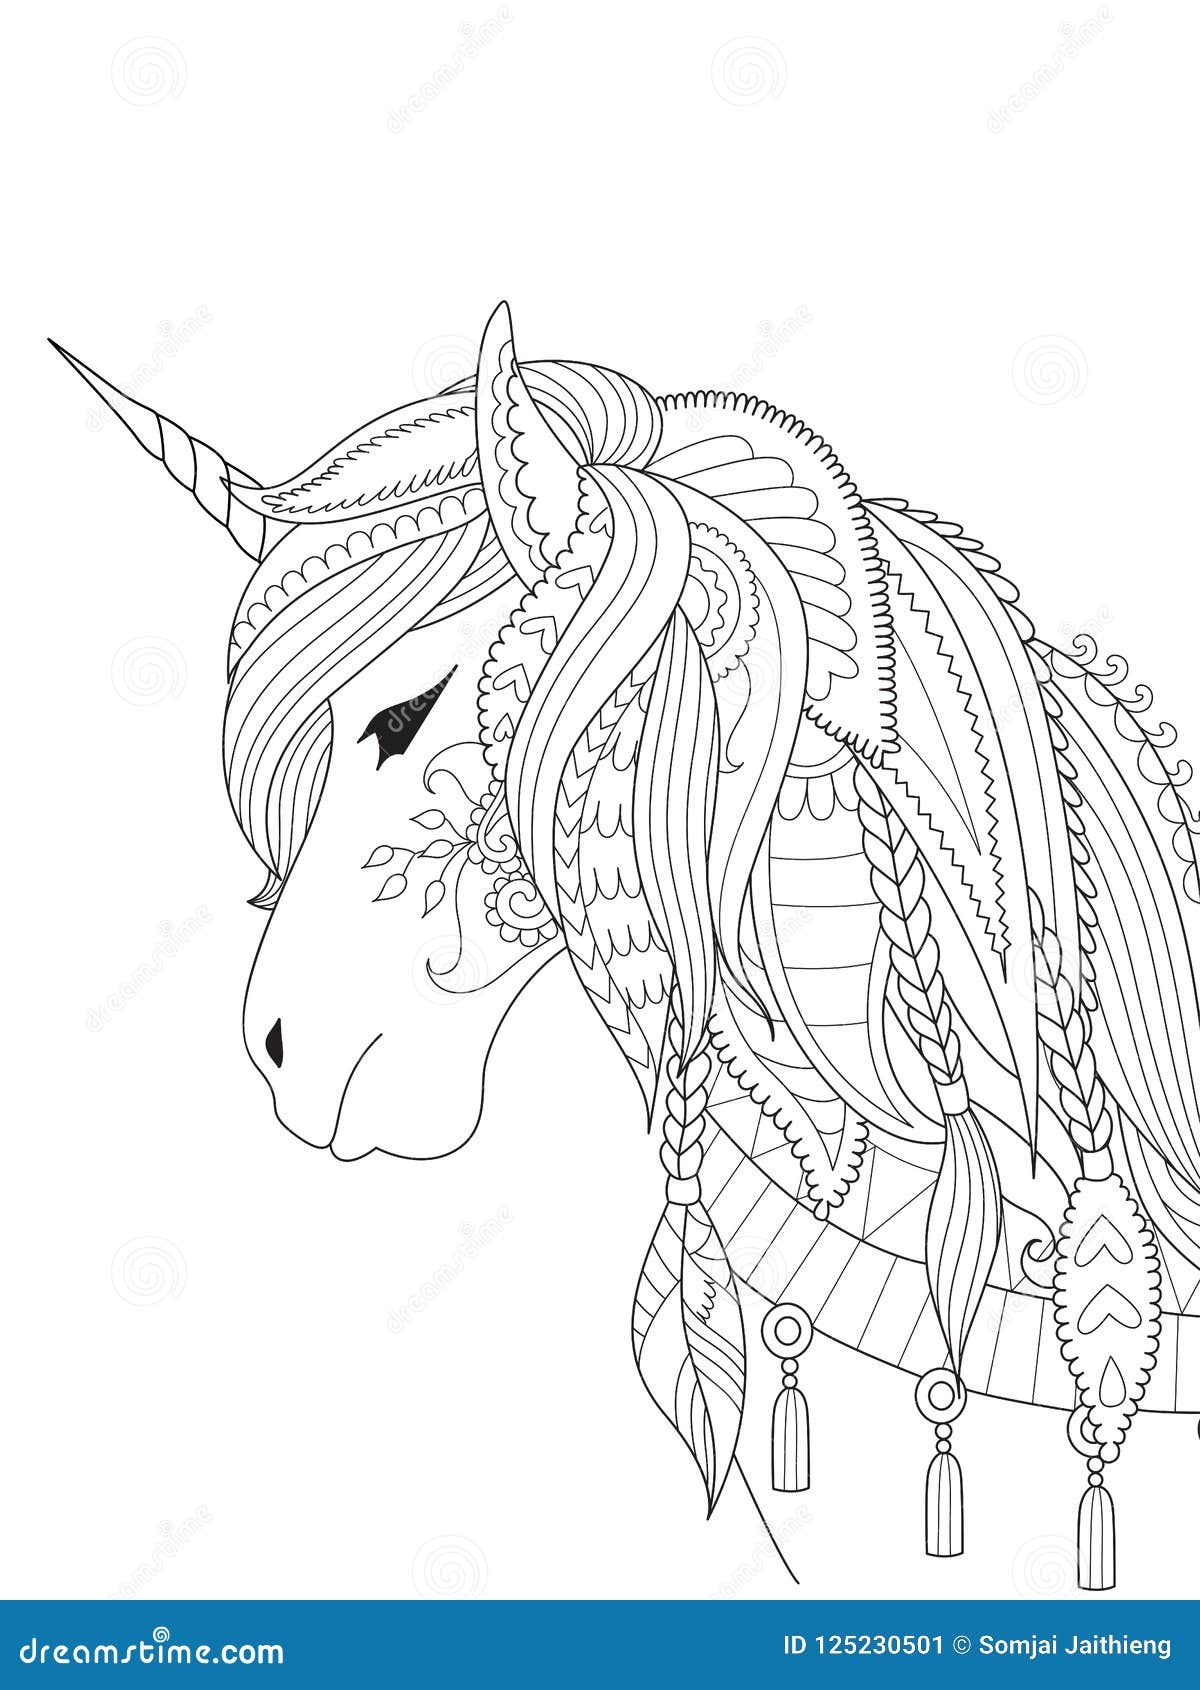 Simple Line Art of Unicorn for Design Element and Coloring Book ...